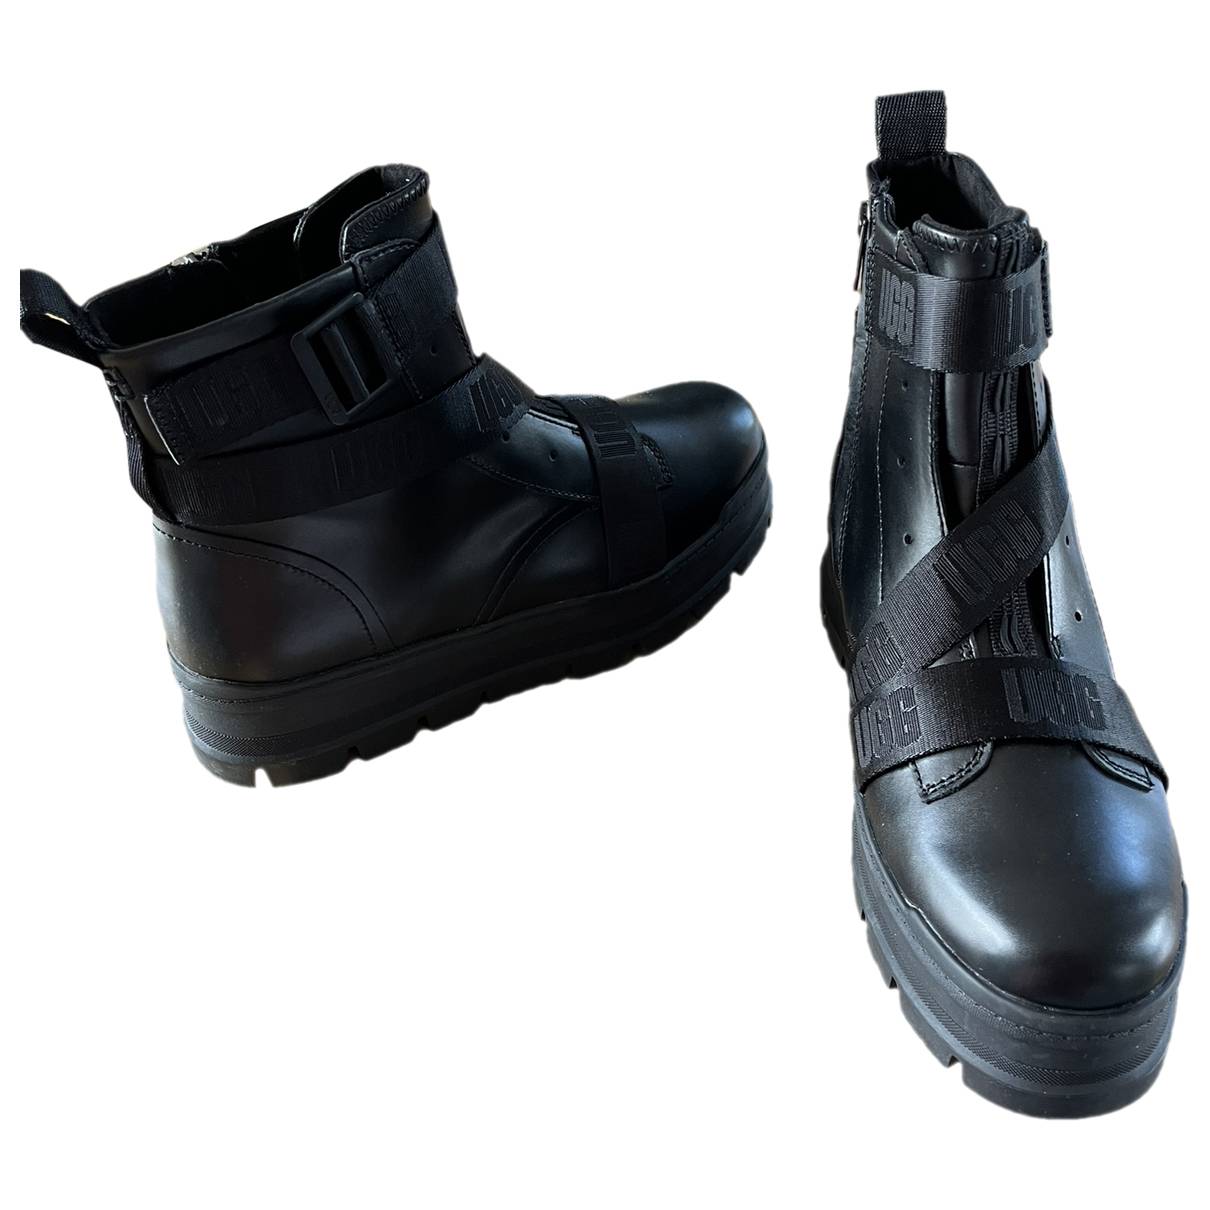 Leather snow boots Ugg Black size 41 EU in Leather - 35789106